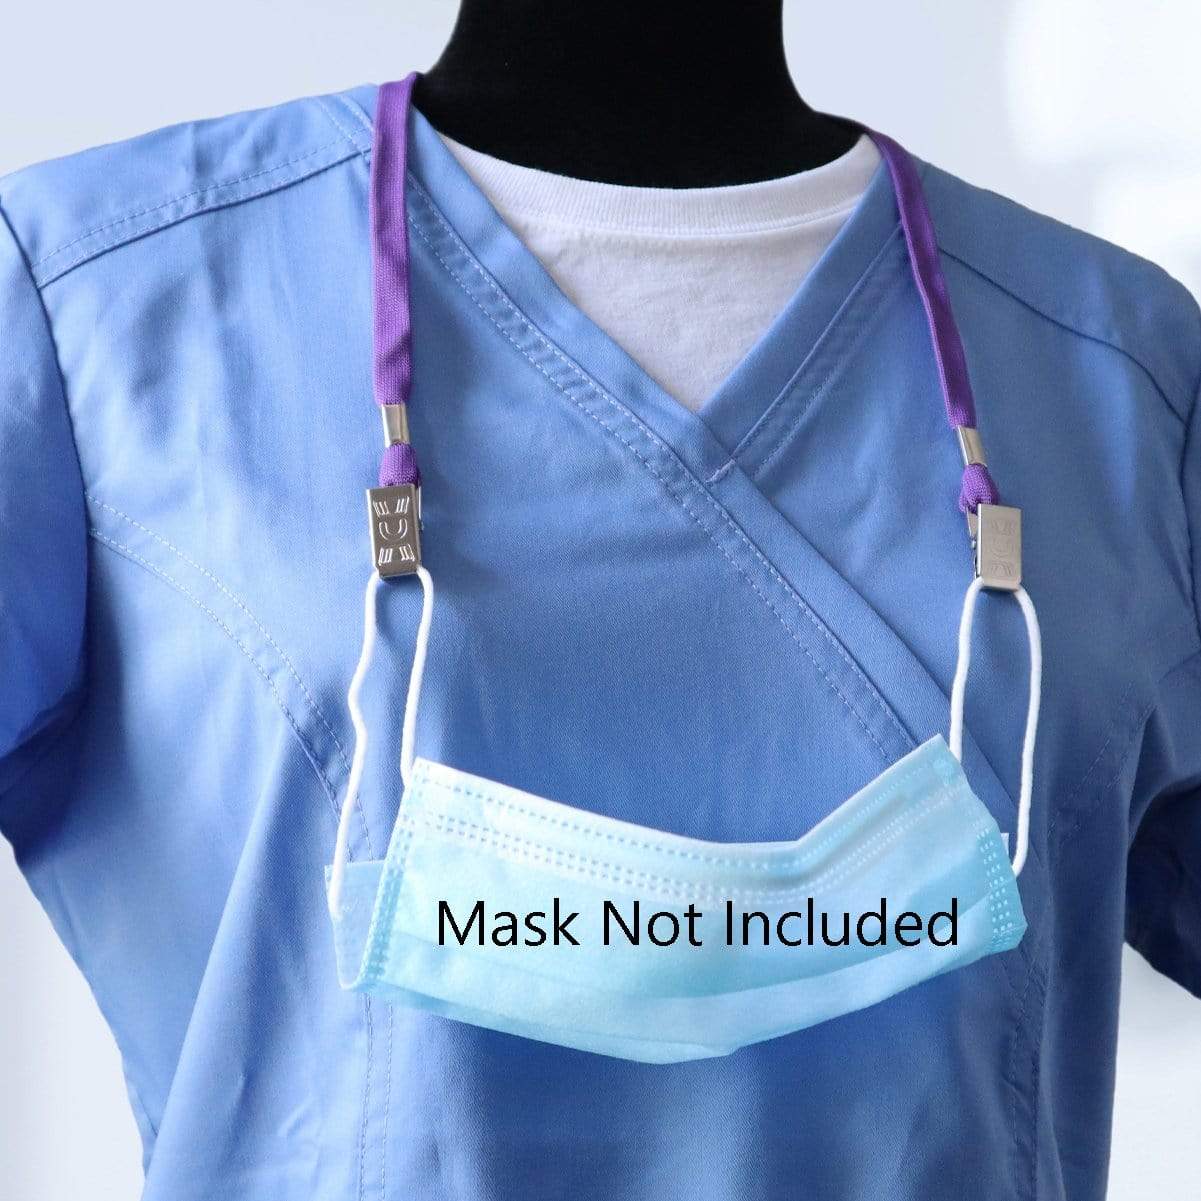 25 Pack Bulk Face Mask Lanyards - Comfort Neck Straps for Facemasks - Ear Savers for All Day Use - Works with Disposable or Fabric / Cotton Face Coverings